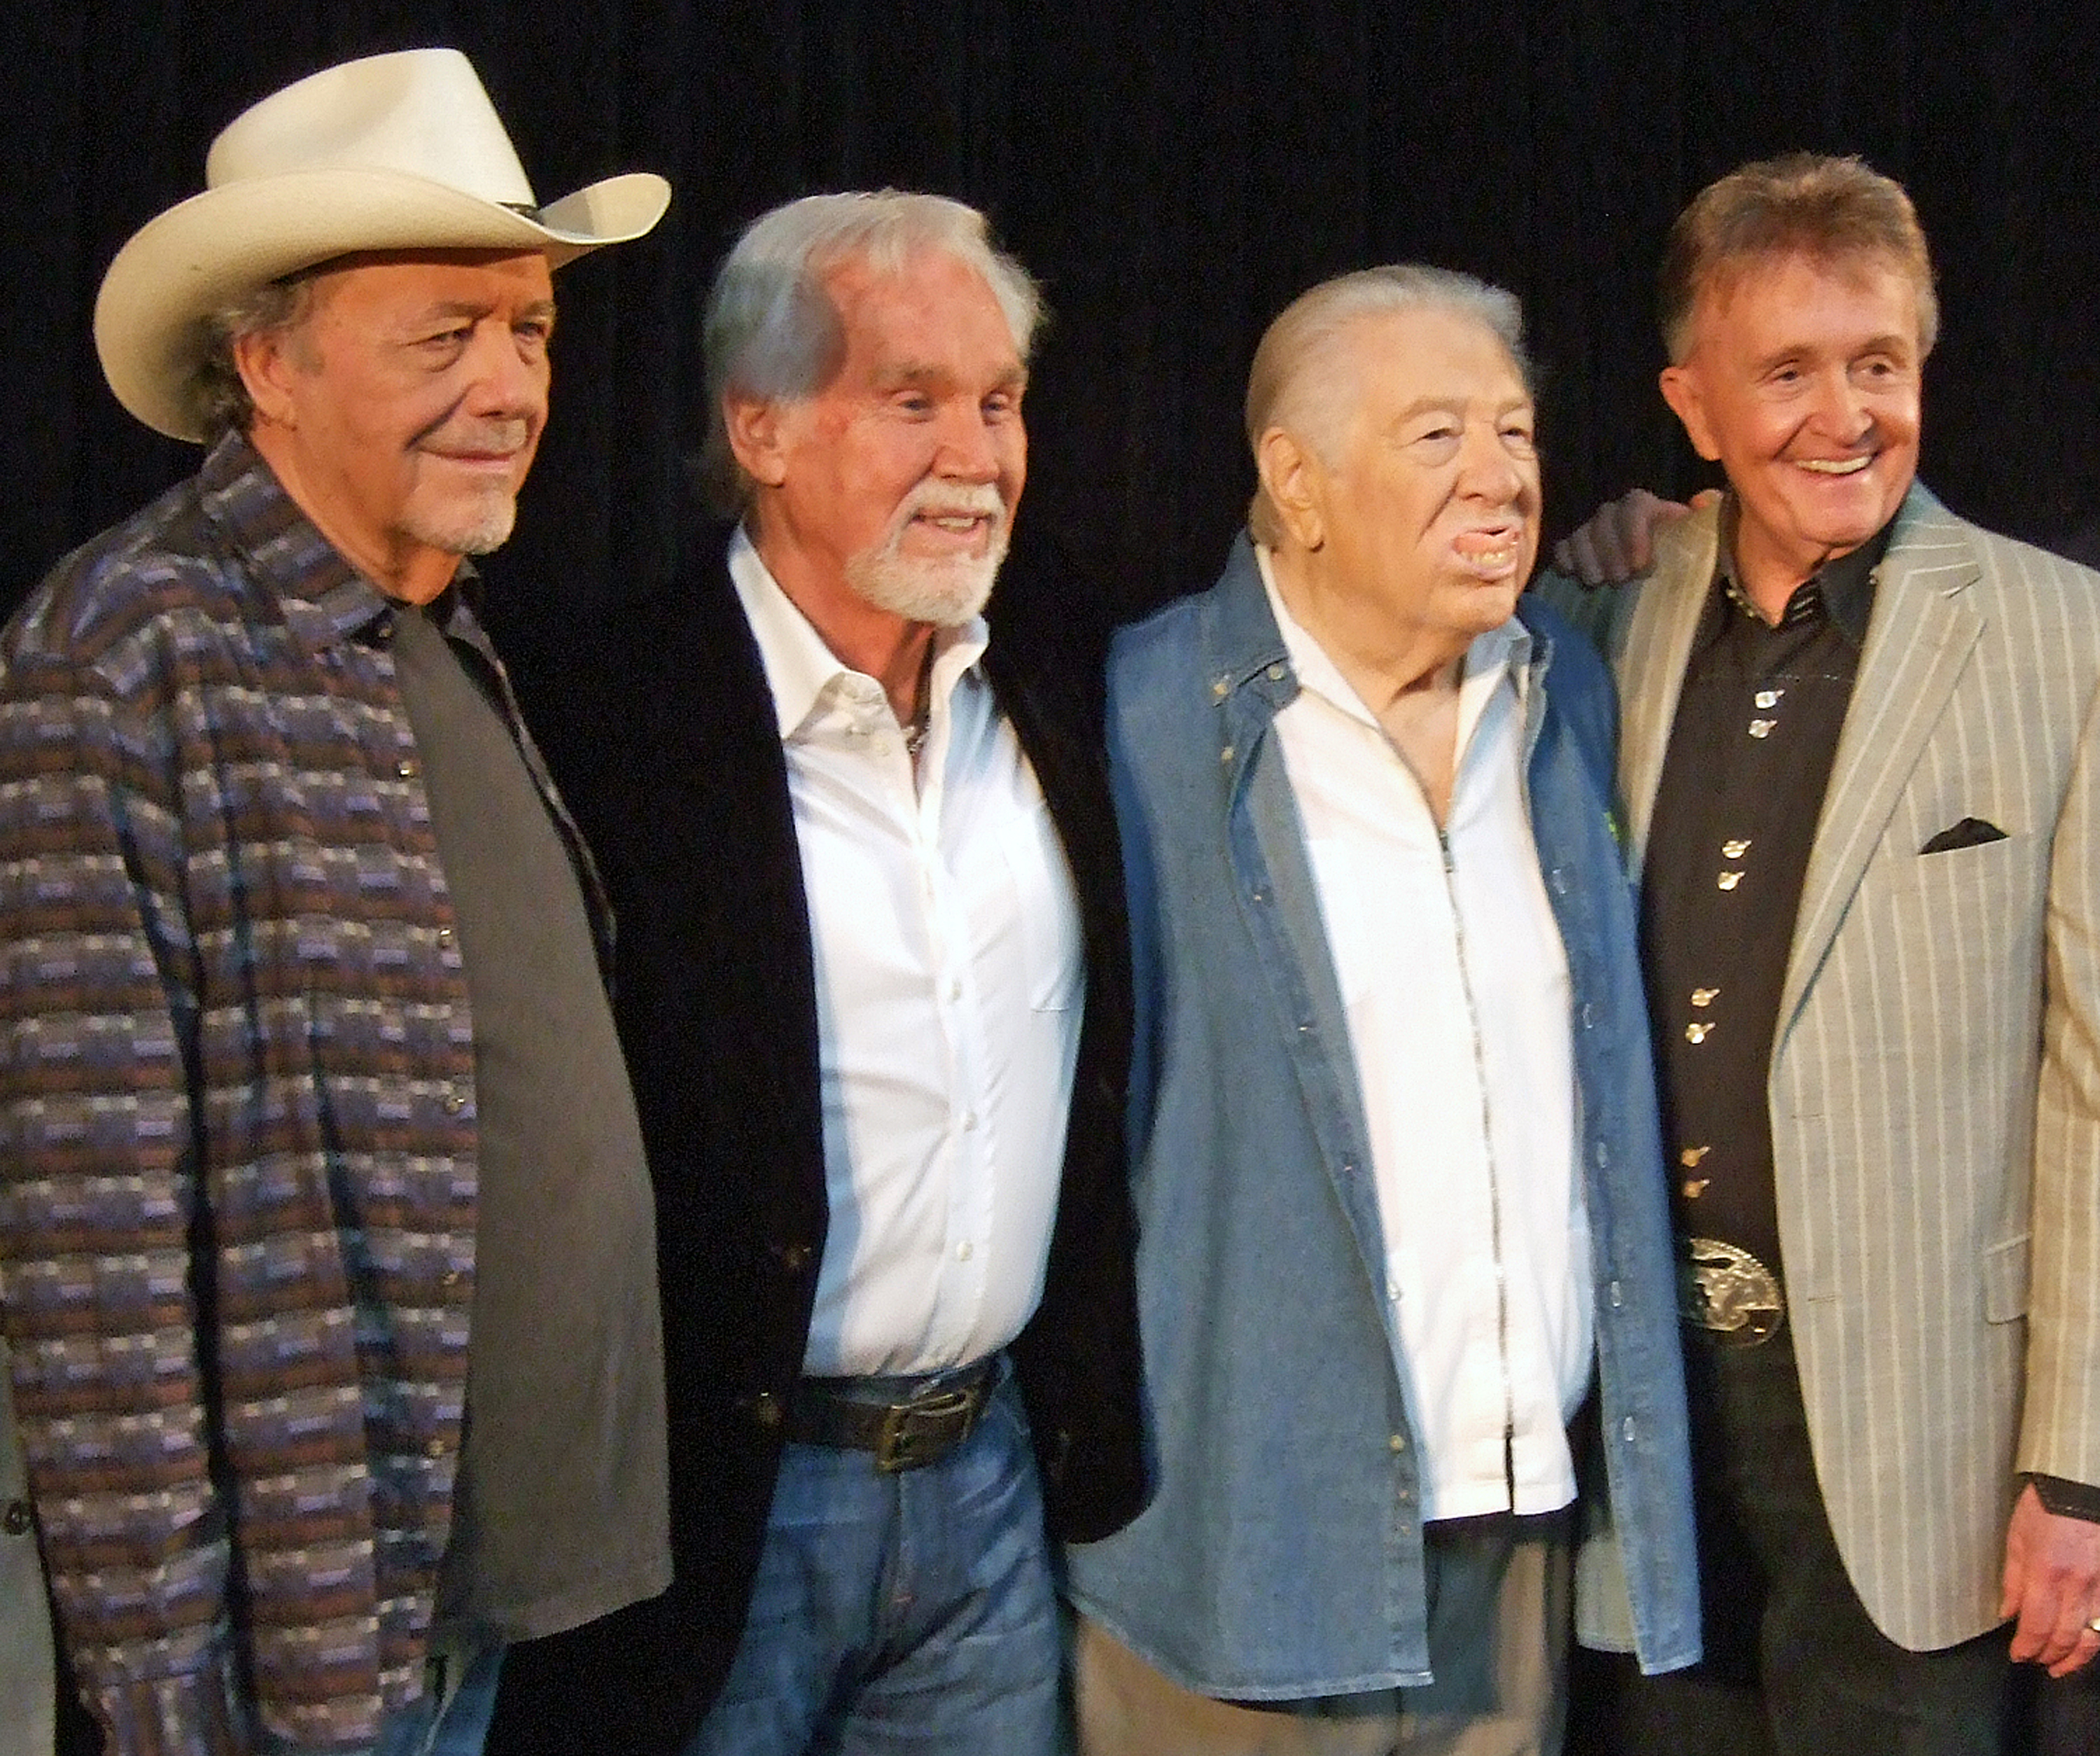 An Ornery Cowboy Jack Clement Leads Country Music Hall Of Fame Inductions